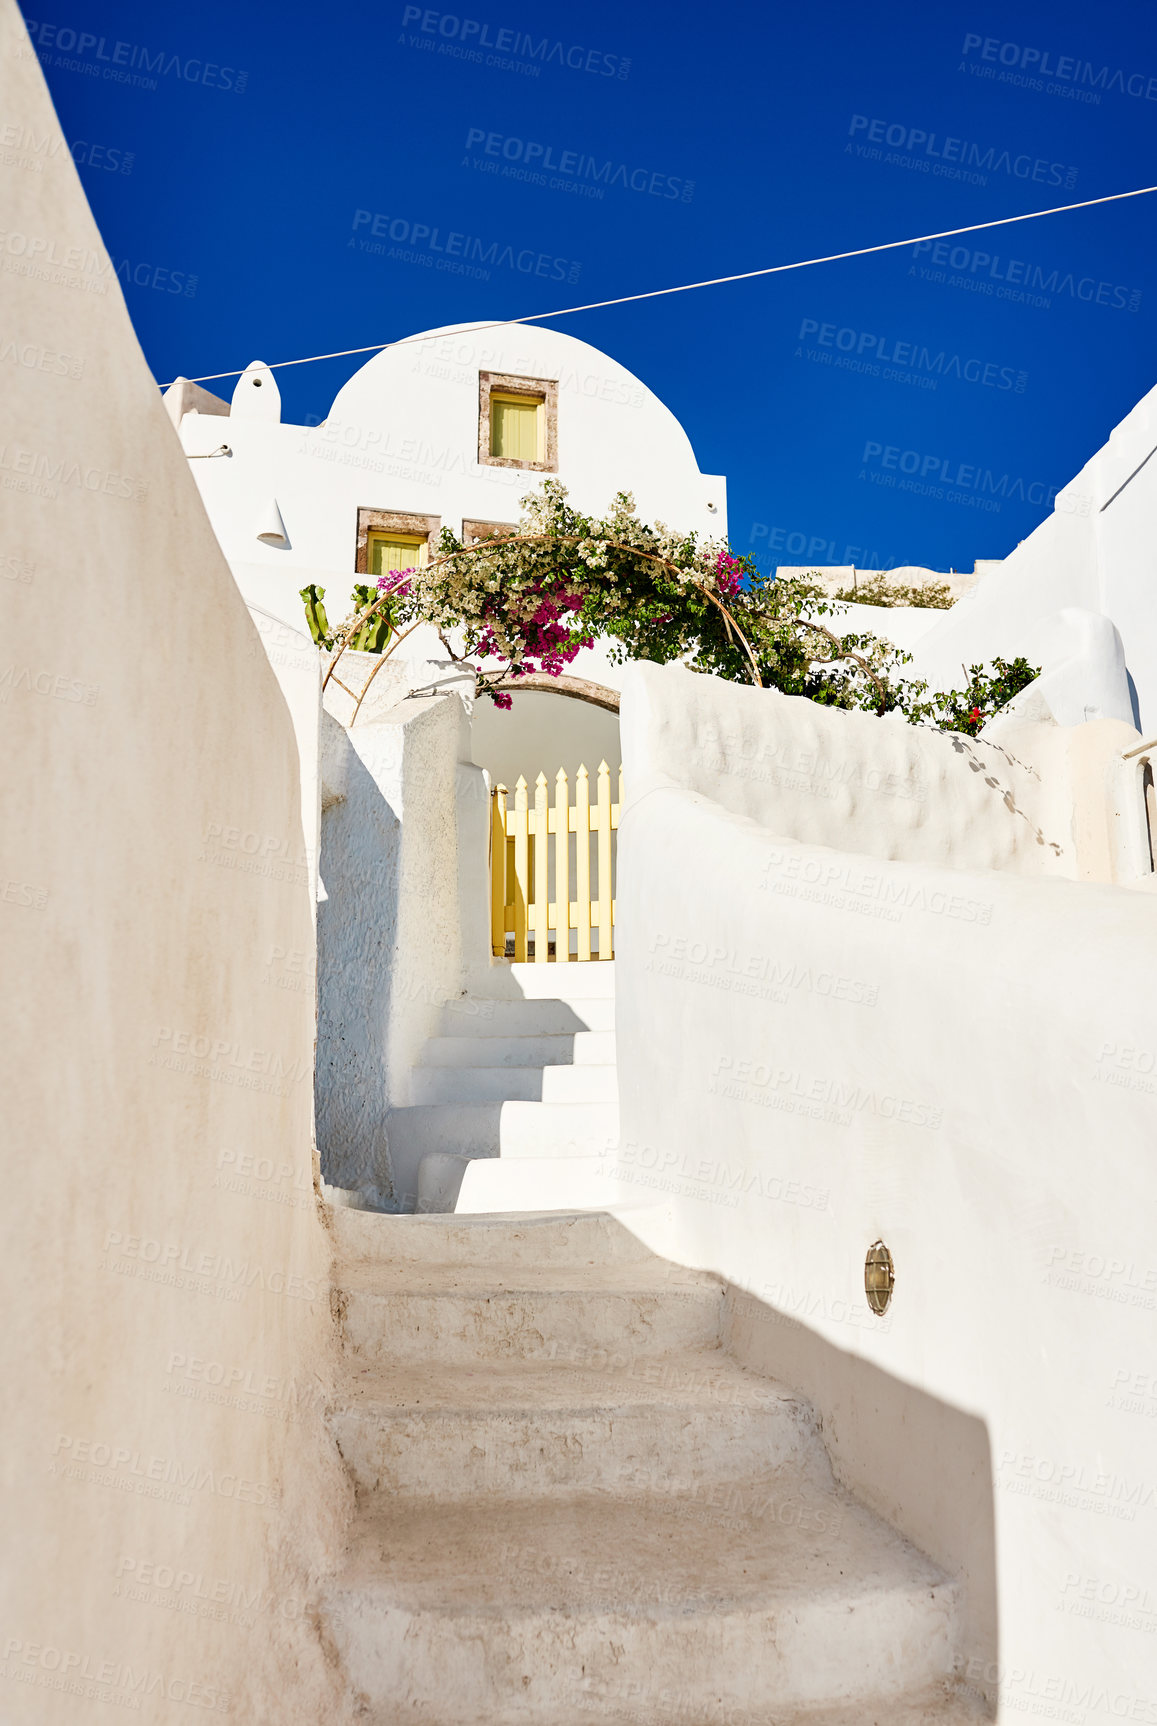 Buy stock photo Shot of a beautiful constructed white building with steps running down the side outside during the day